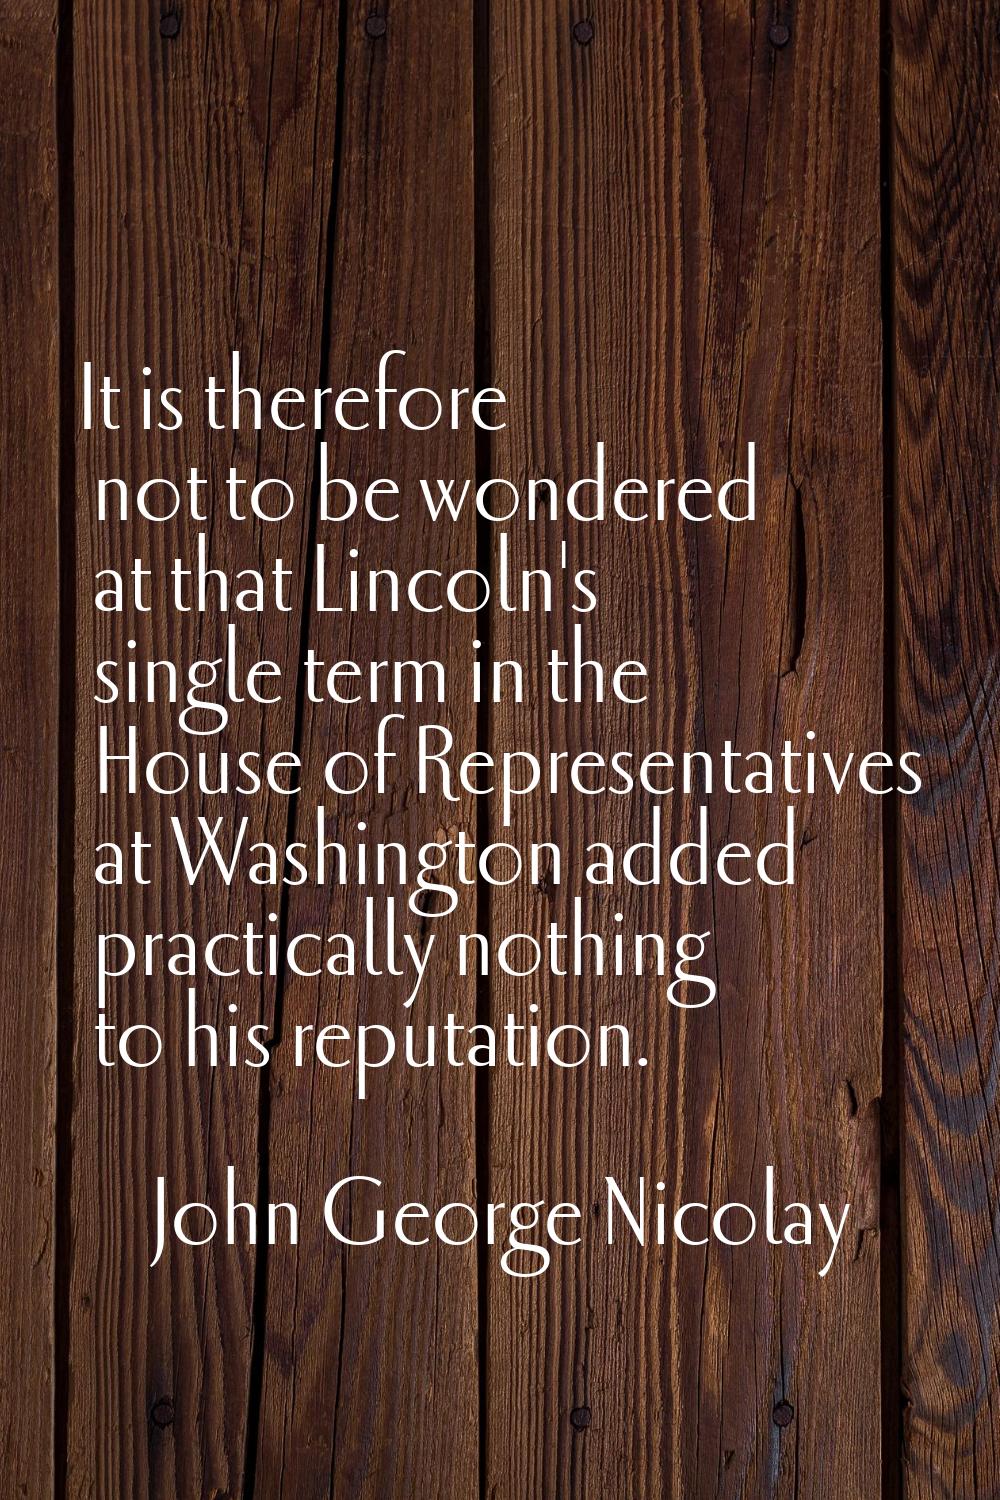 It is therefore not to be wondered at that Lincoln's single term in the House of Representatives at